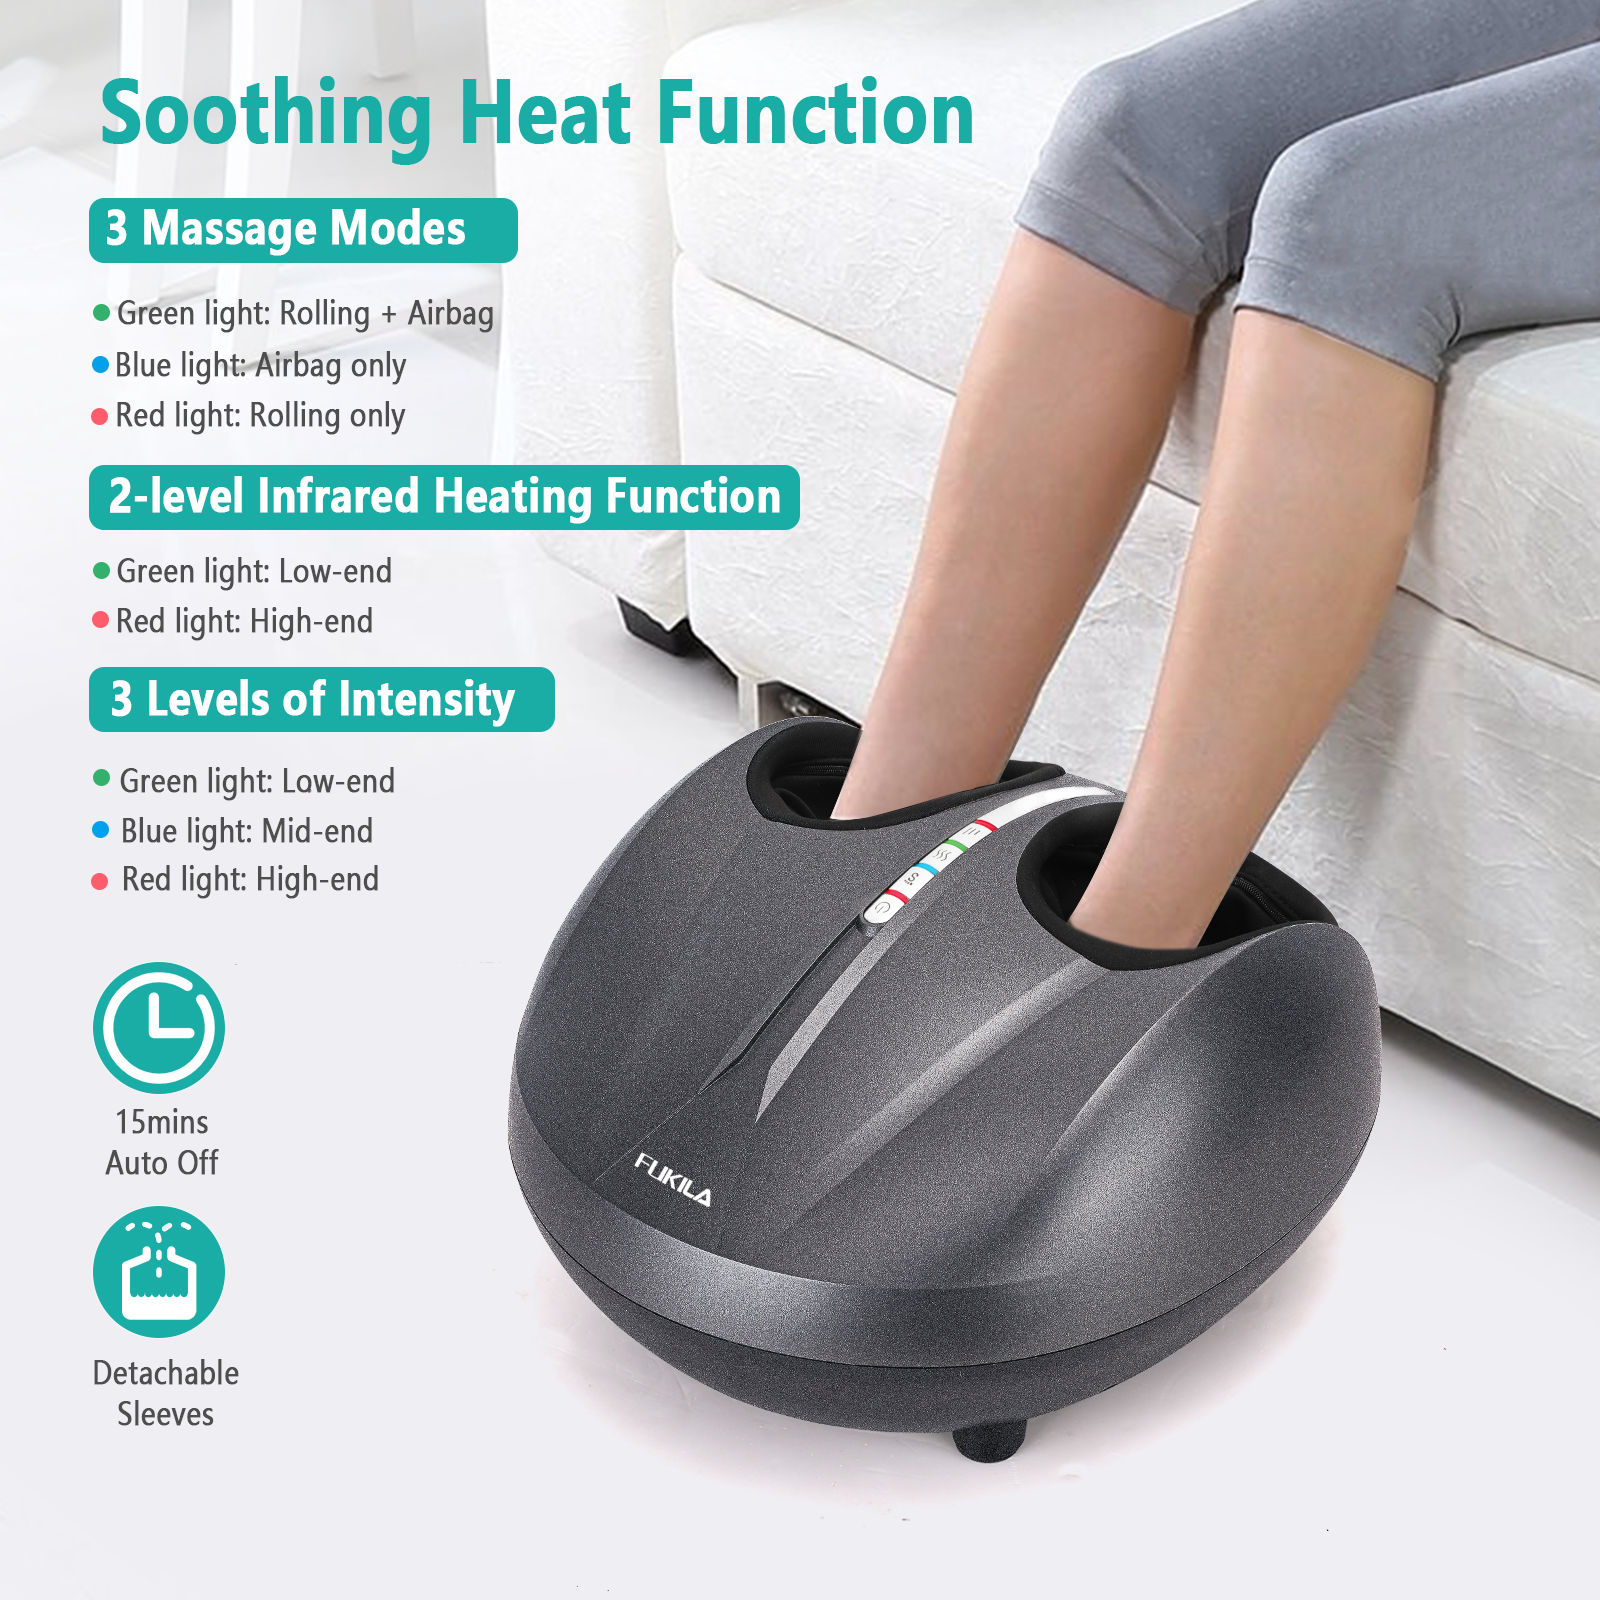 Nekteck Foot Massager Machine with Heat, Deep Kneading Shiatsu Foot Massager with Air Compression, Soothe Muscles, Multiple Massage Modes & Adjustable